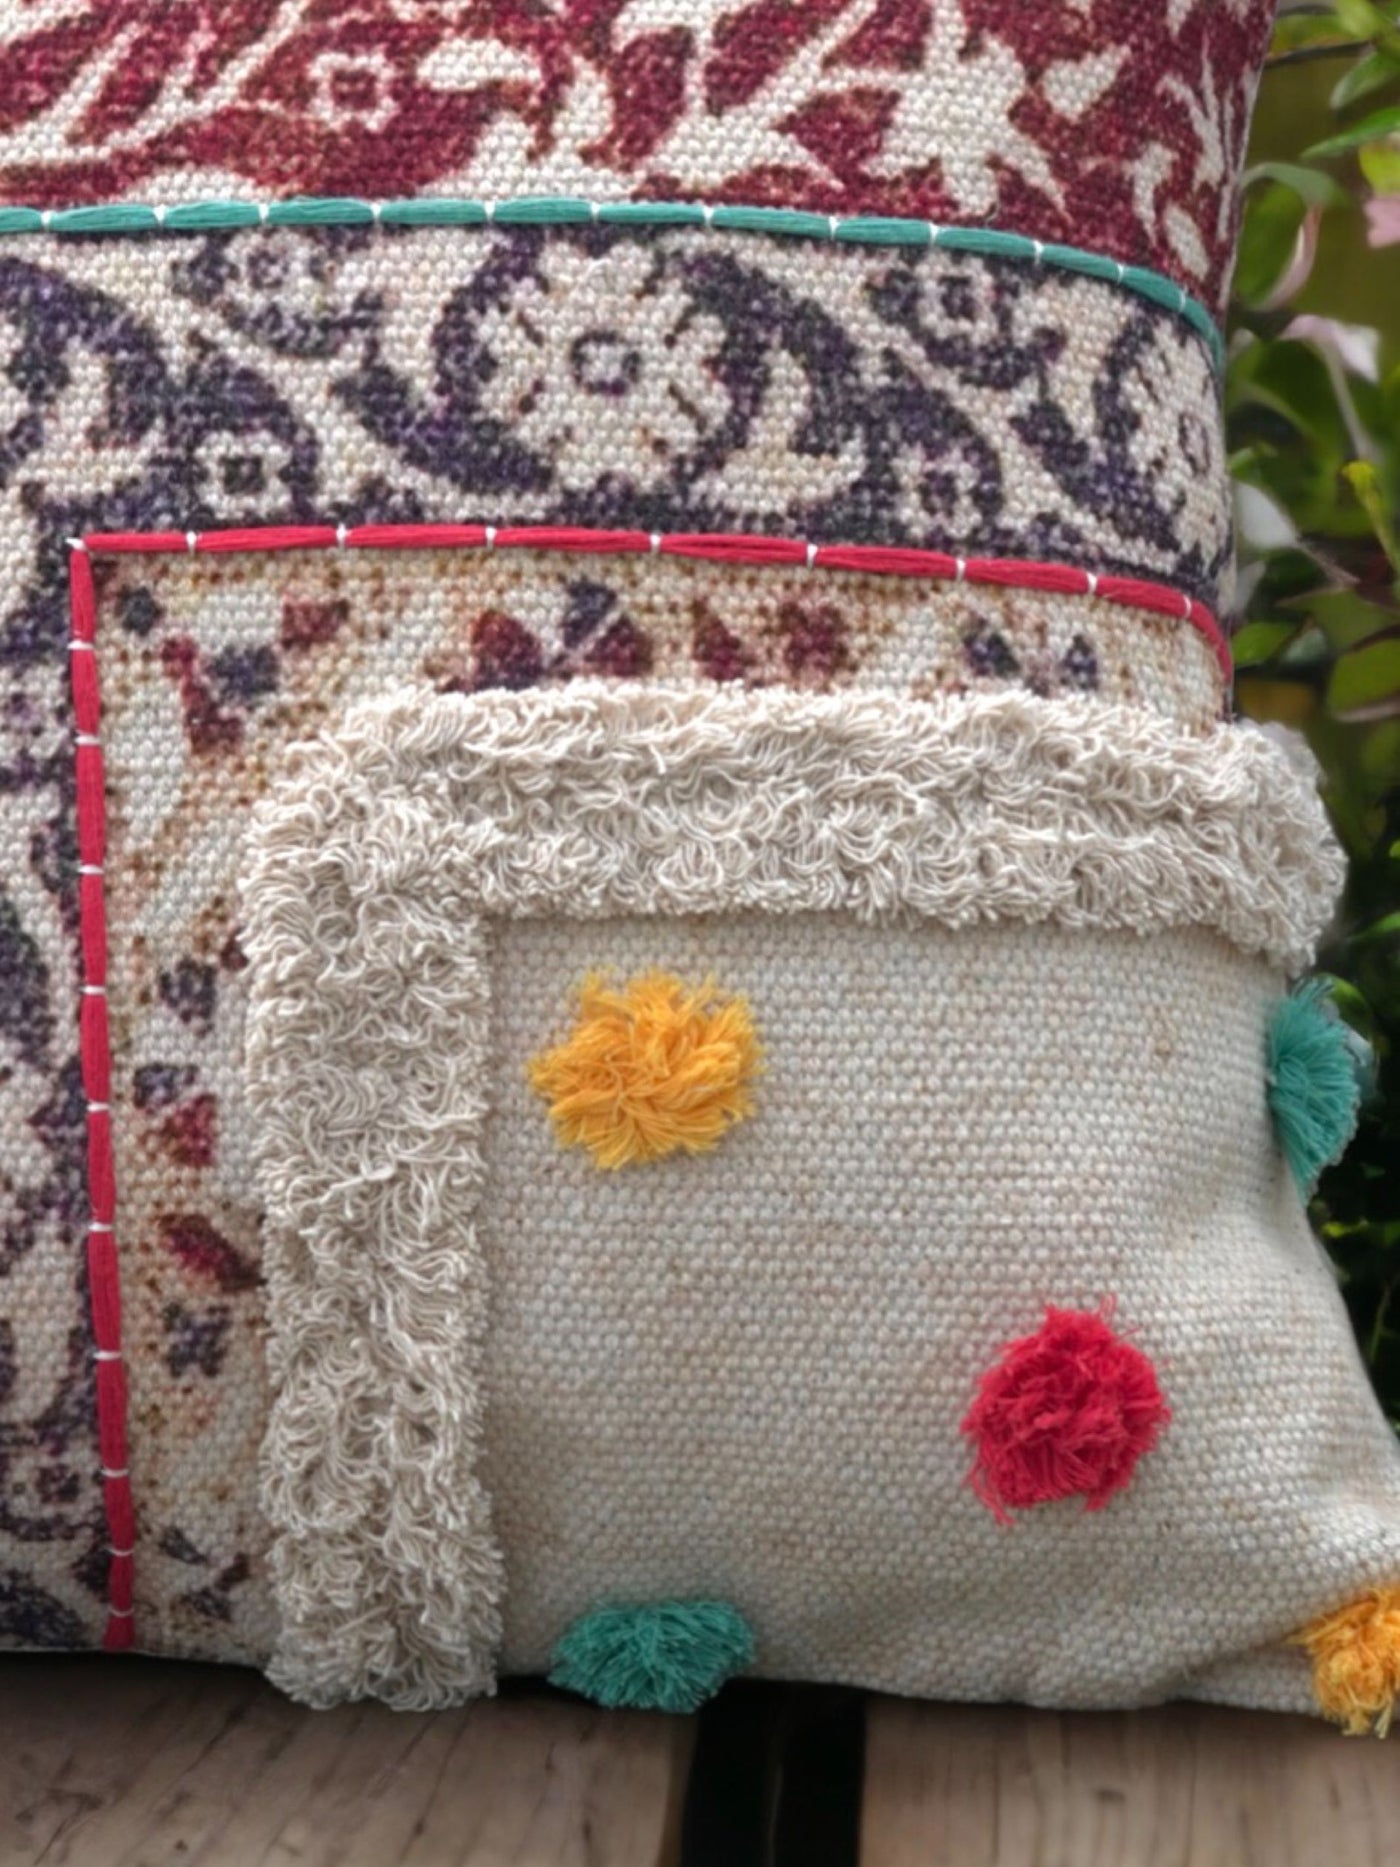 Berh Embroidered Cotton Cushion